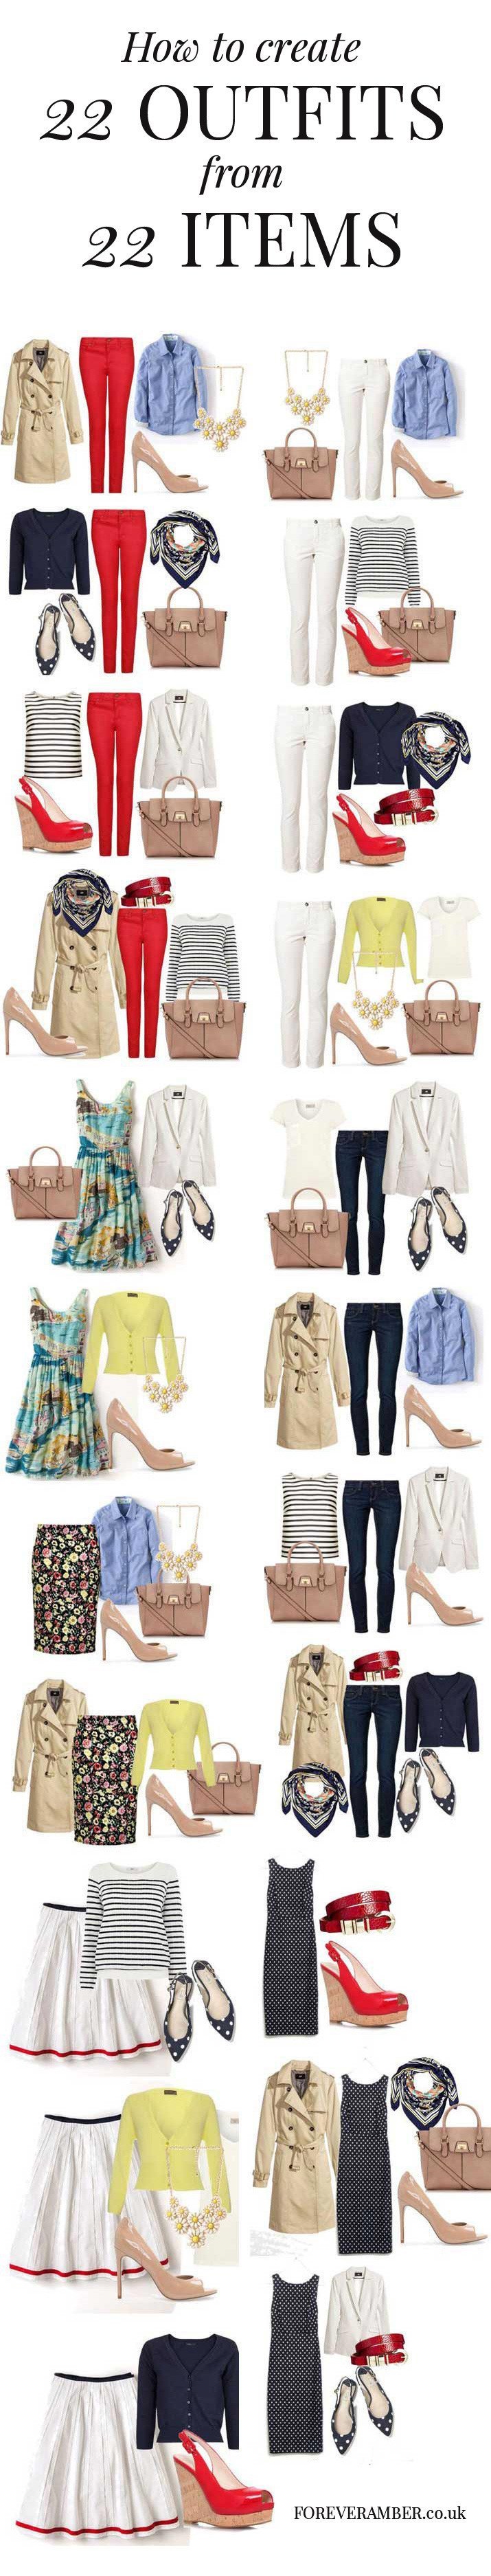 22 outfits from a capsule wardrobe